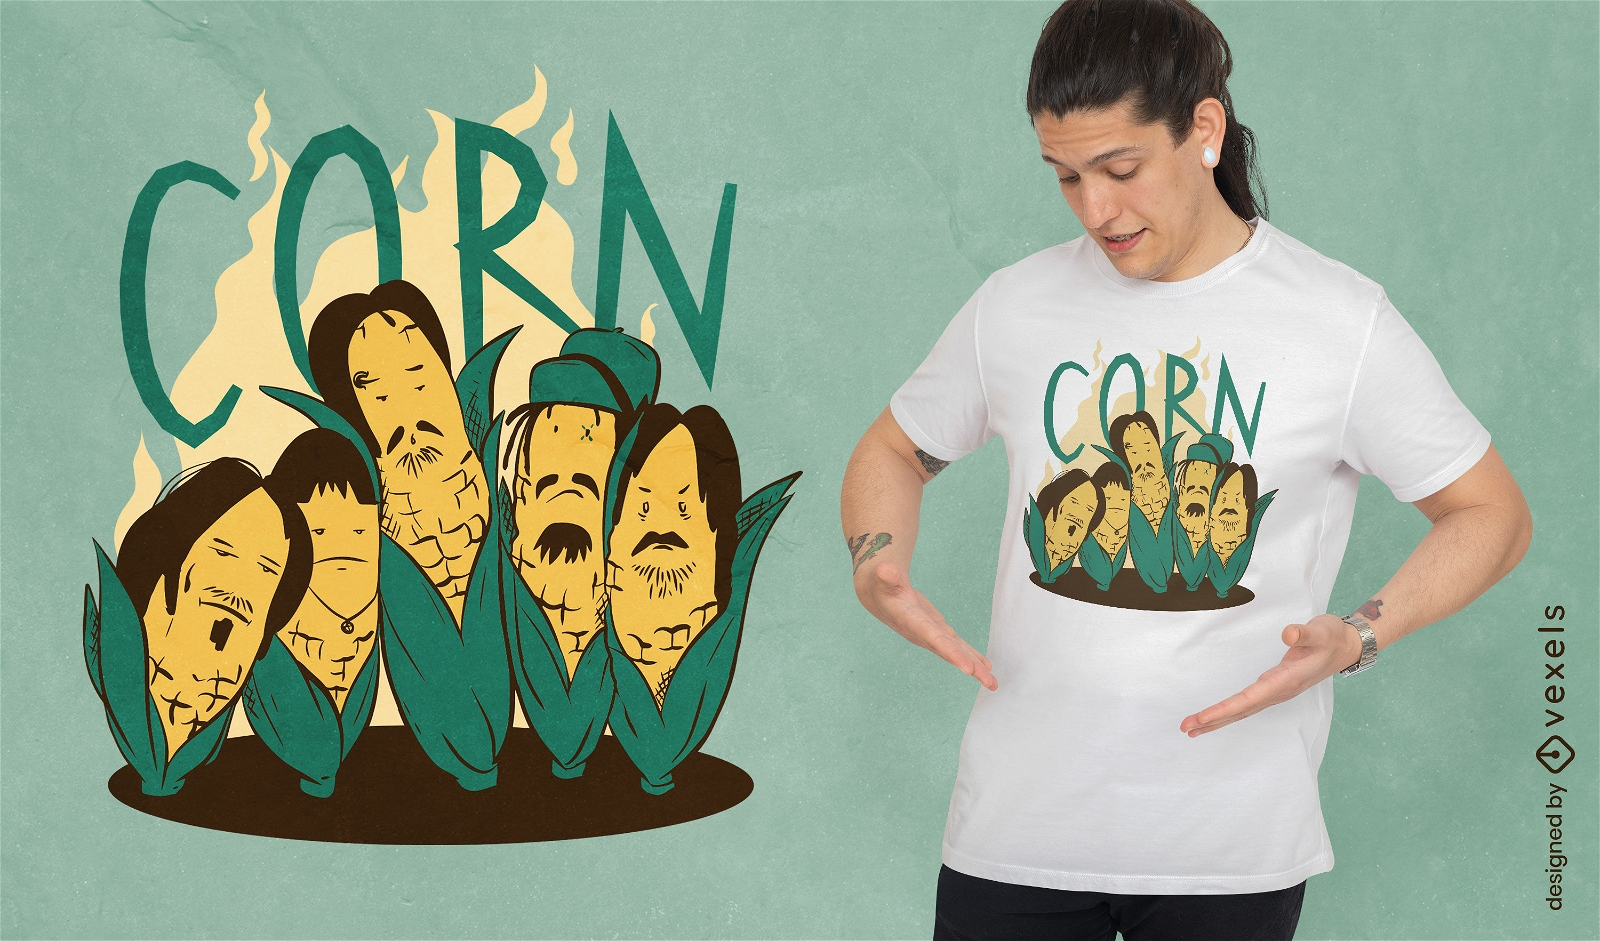 Corn vegetables with faces t-shirt design